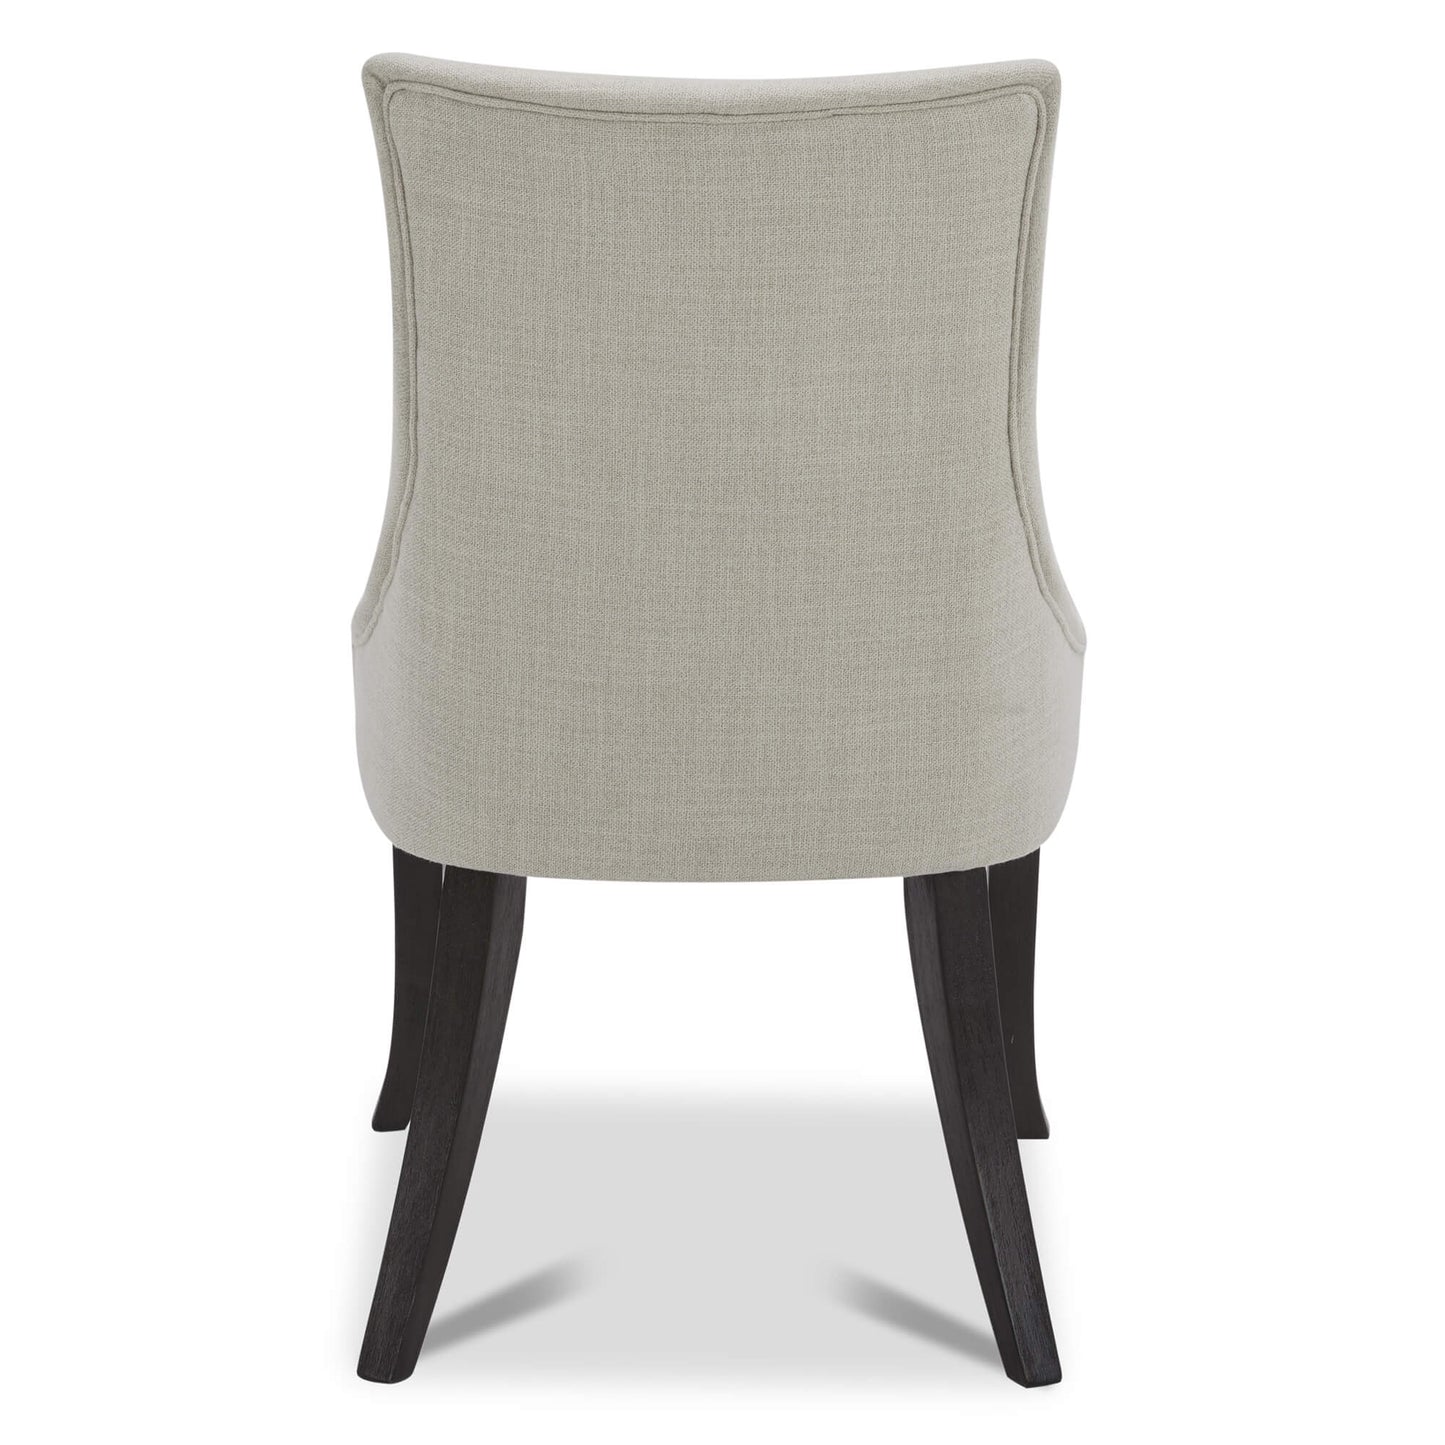 CHITA LIVING-Mia Romantic Dining Chair (Set of 2)-Dining Chairs-Performance Fabric-Linen-